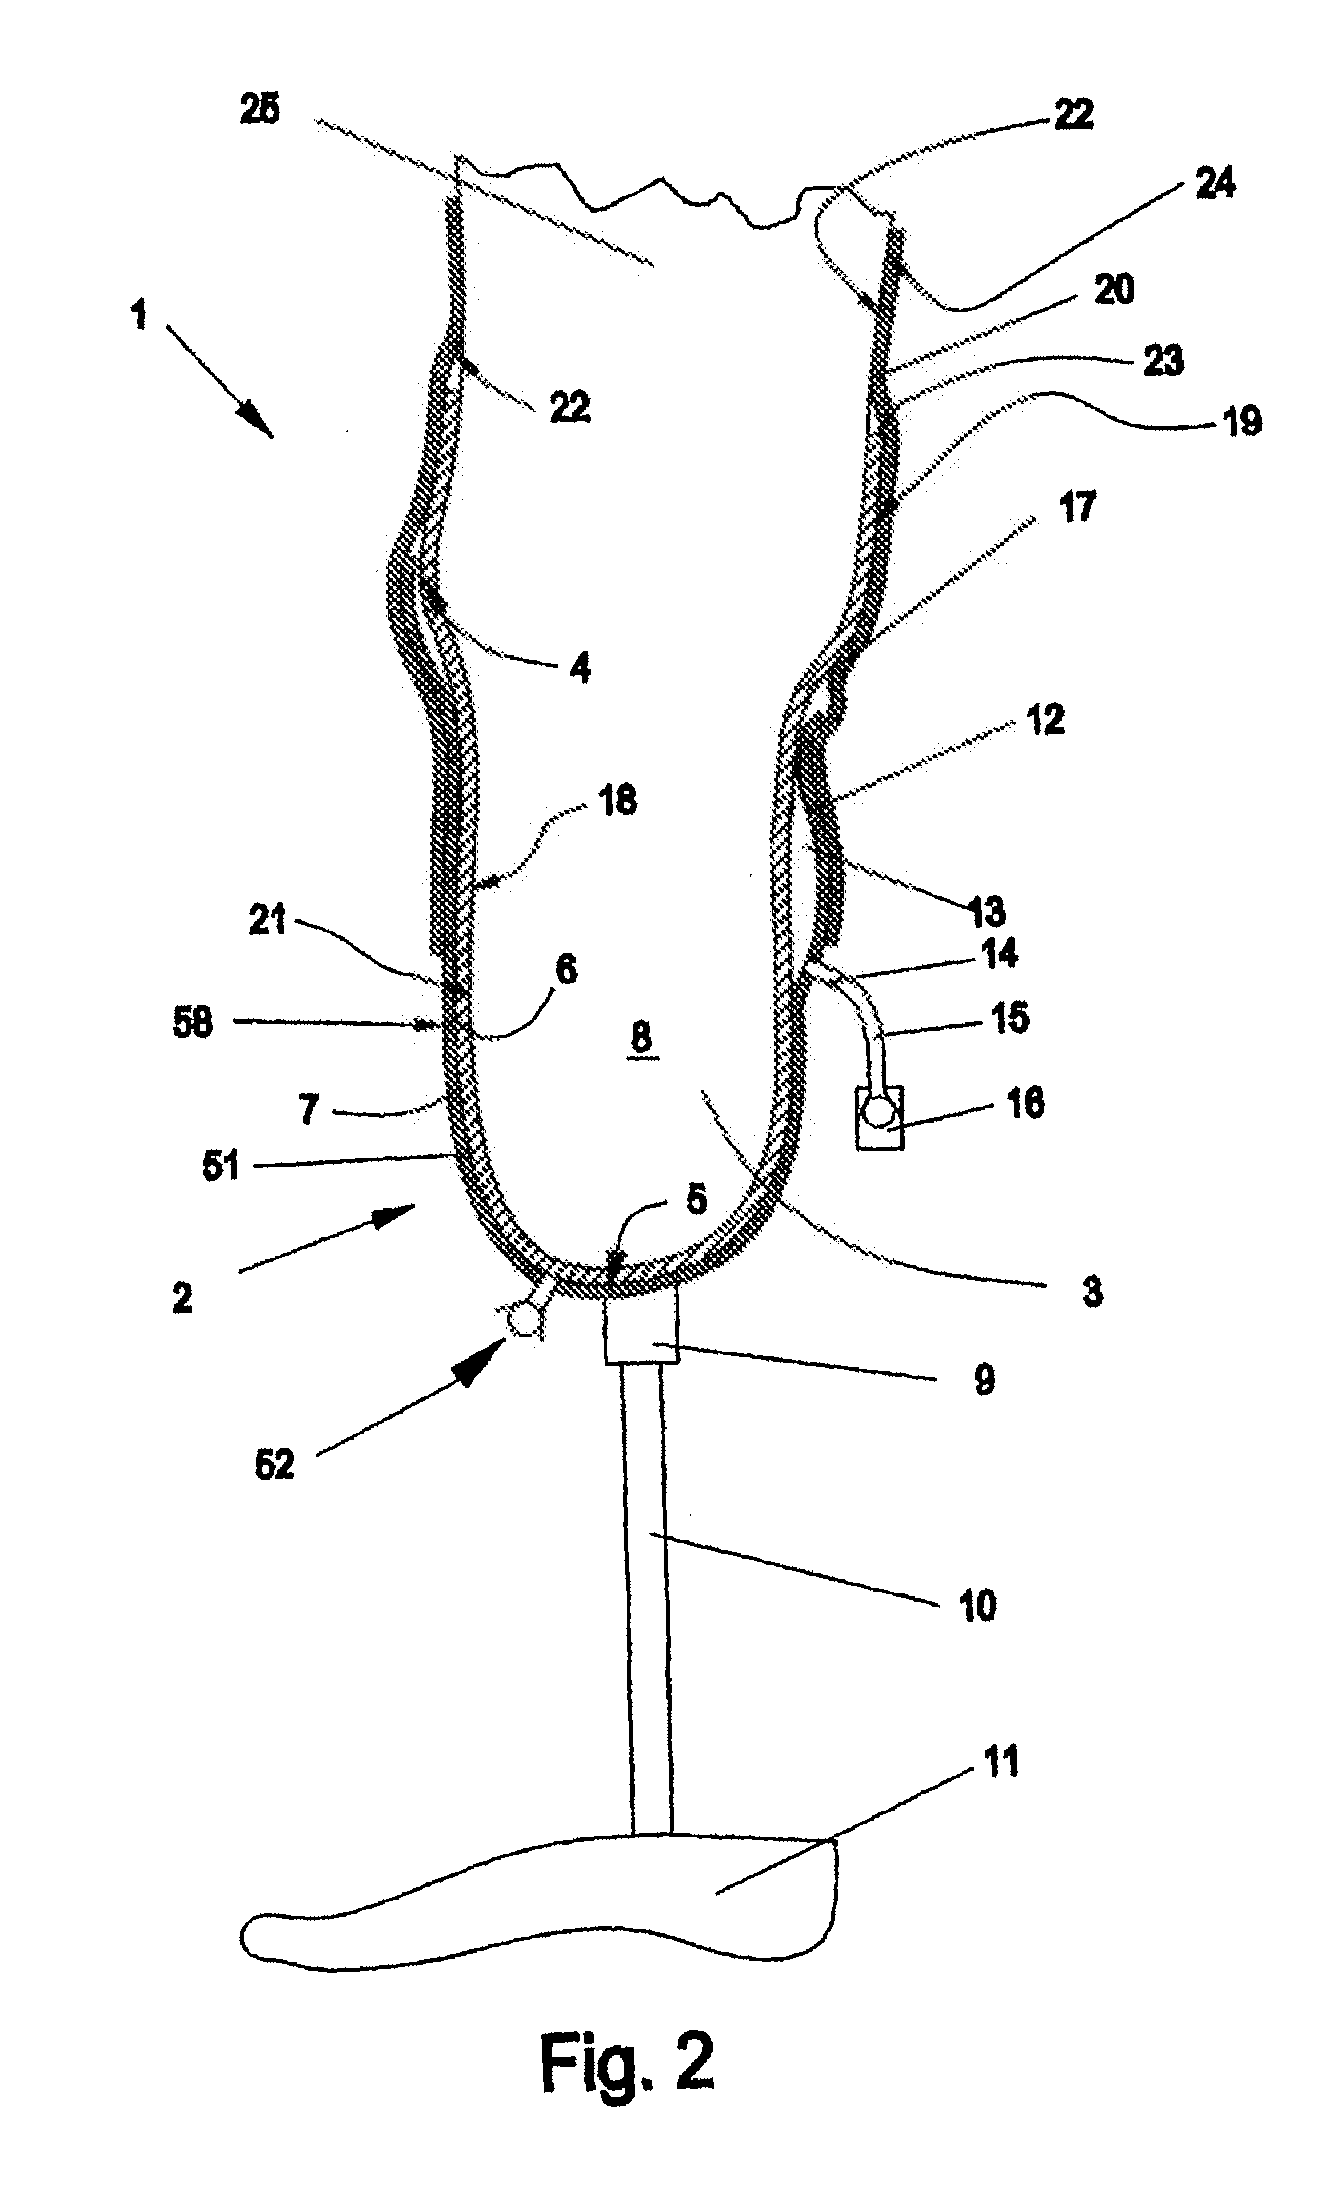 Prosthesis shaft with active air release